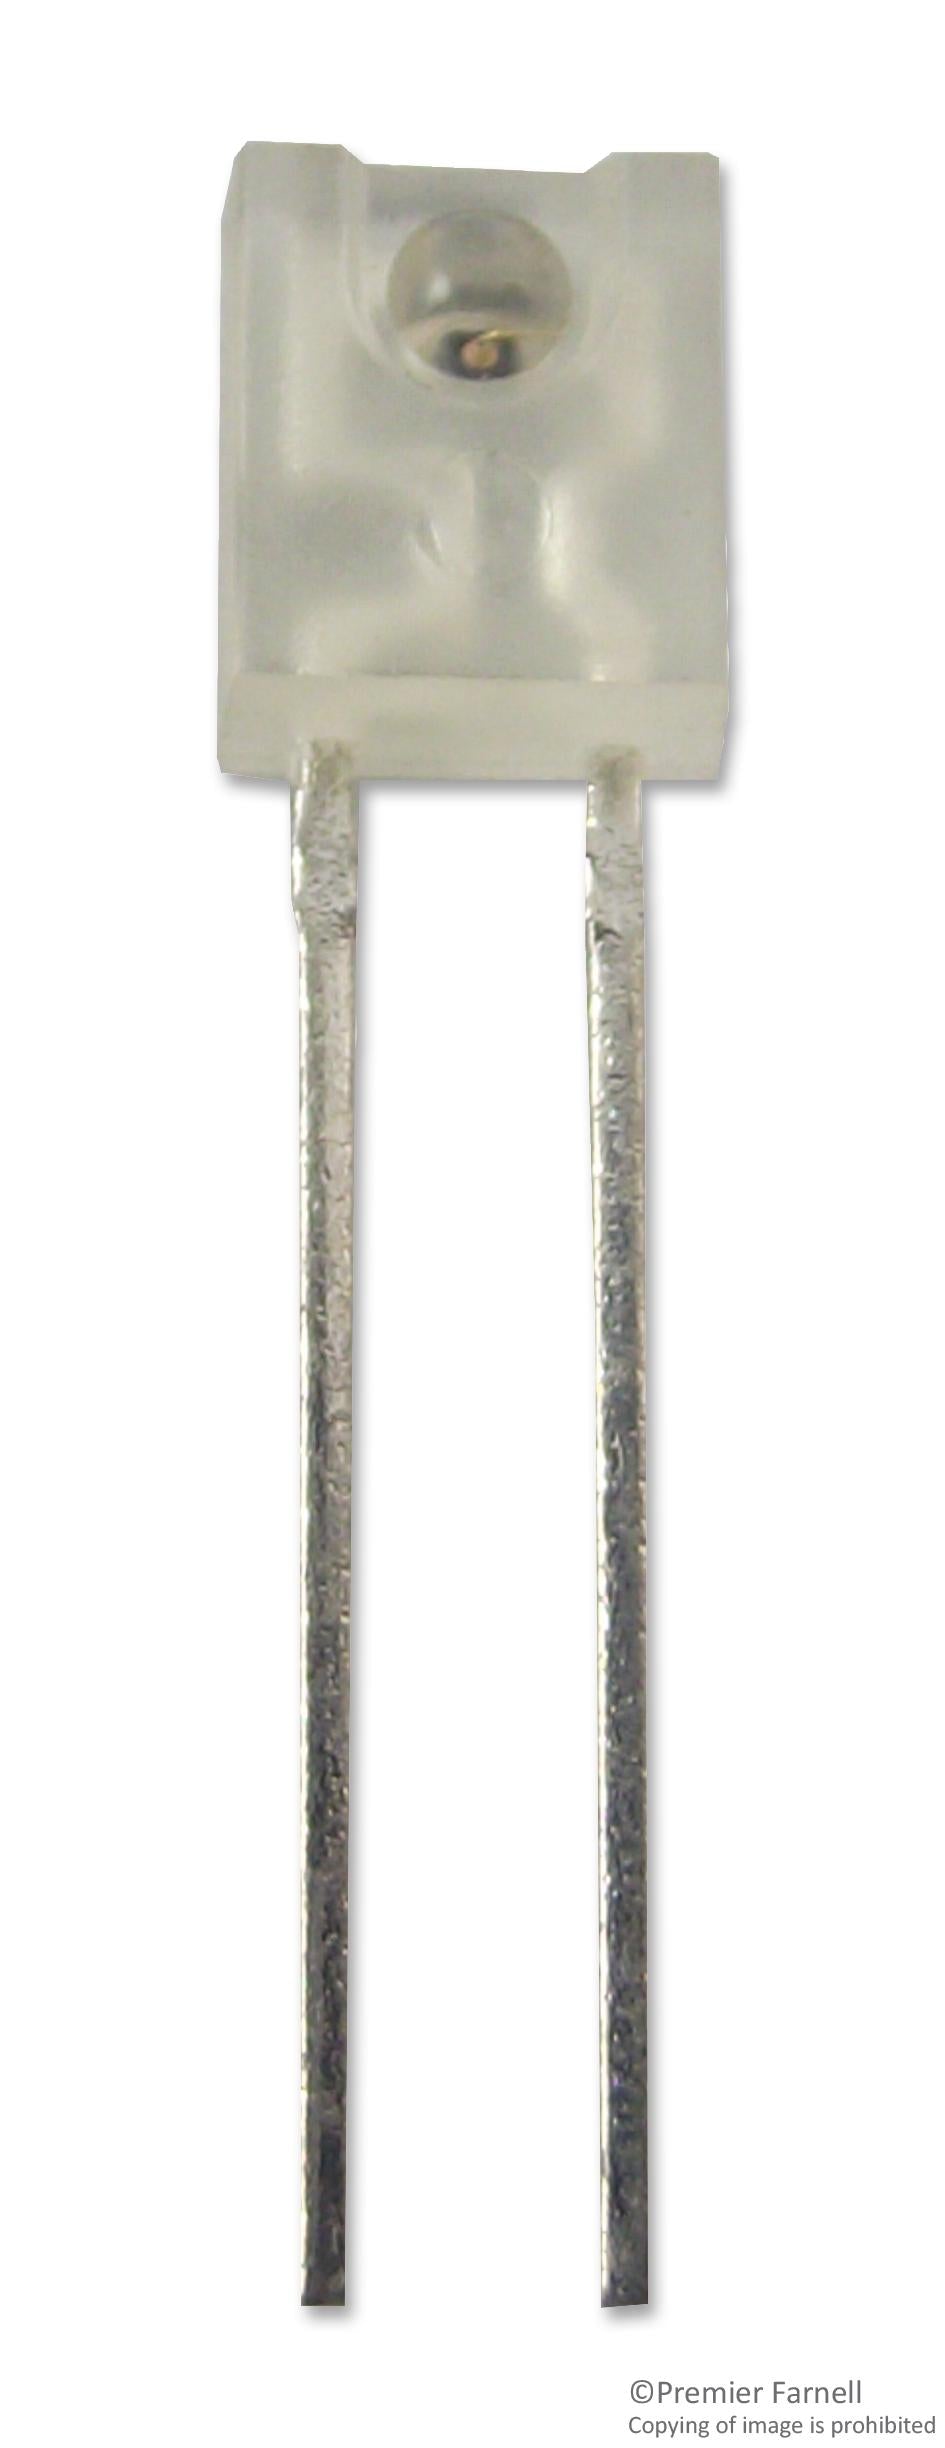 QEE123 INFRARED EMITTER, 890 NM, RADIAL LEADED ONSEMI